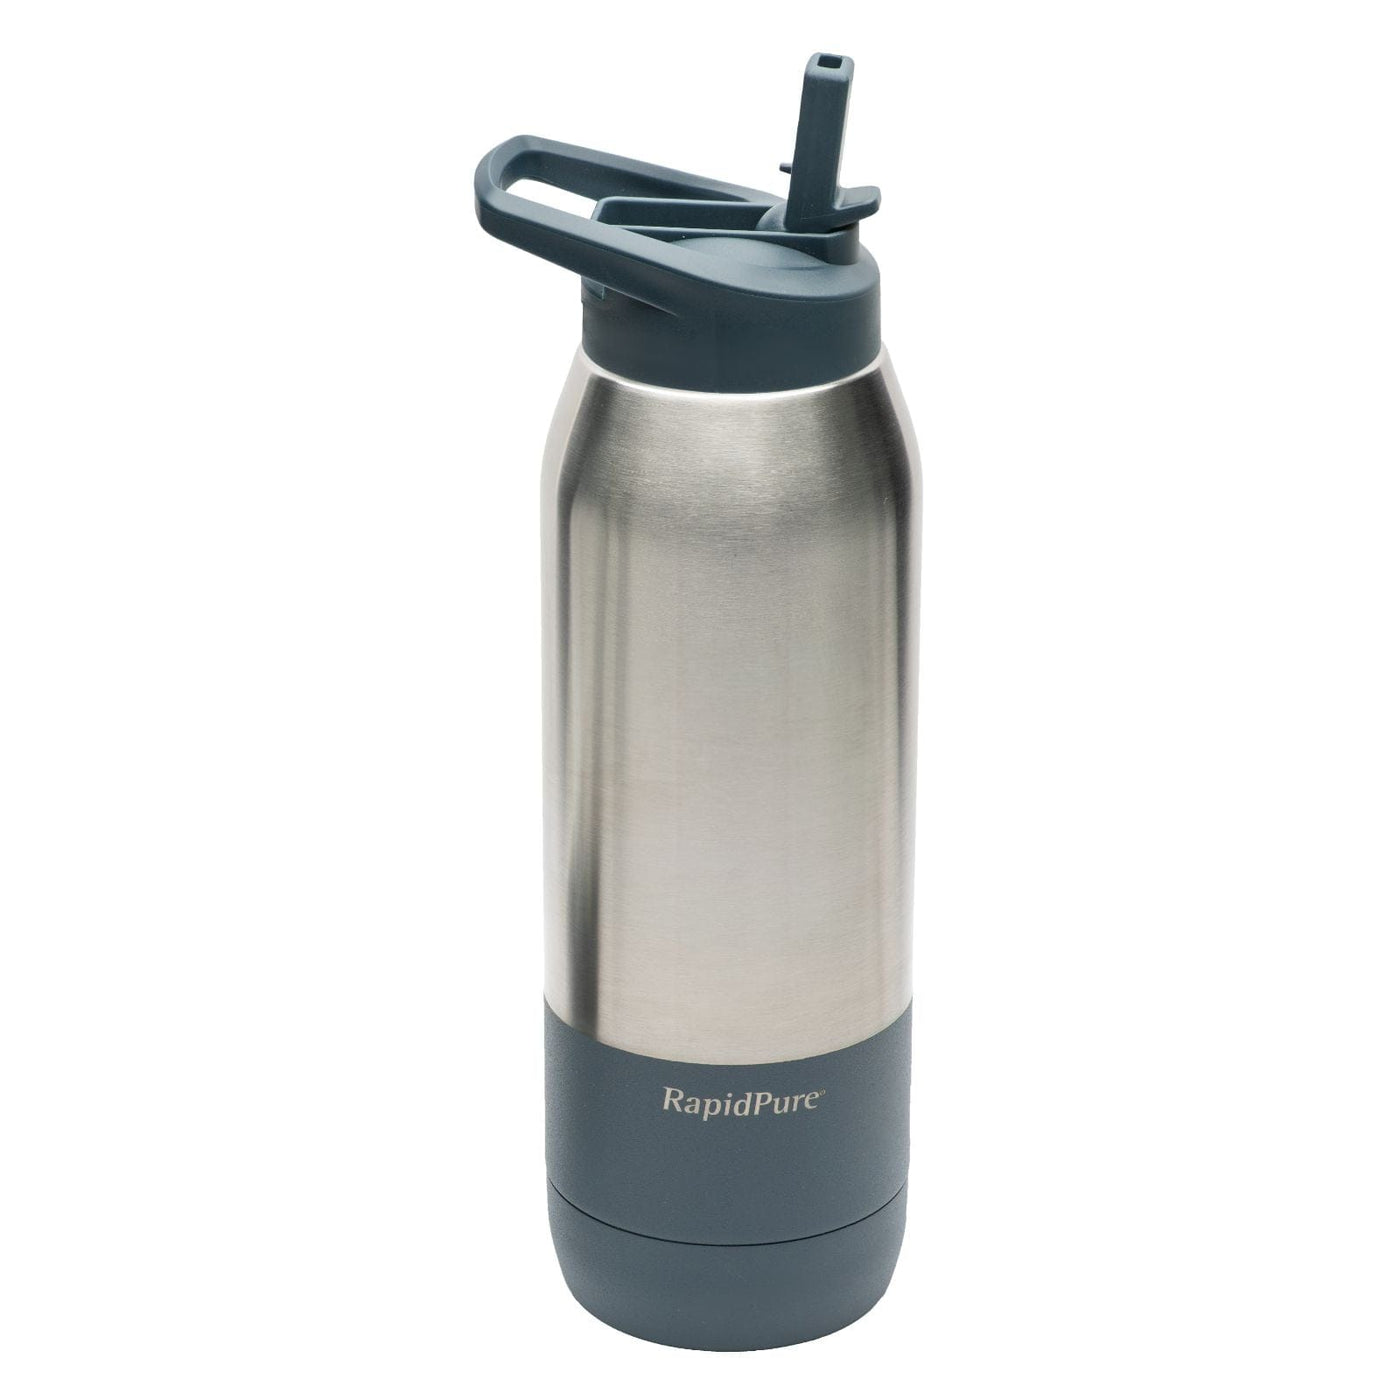 RapidPure RapidPure Purifier and Insulated Bottle Camping And Outdoor